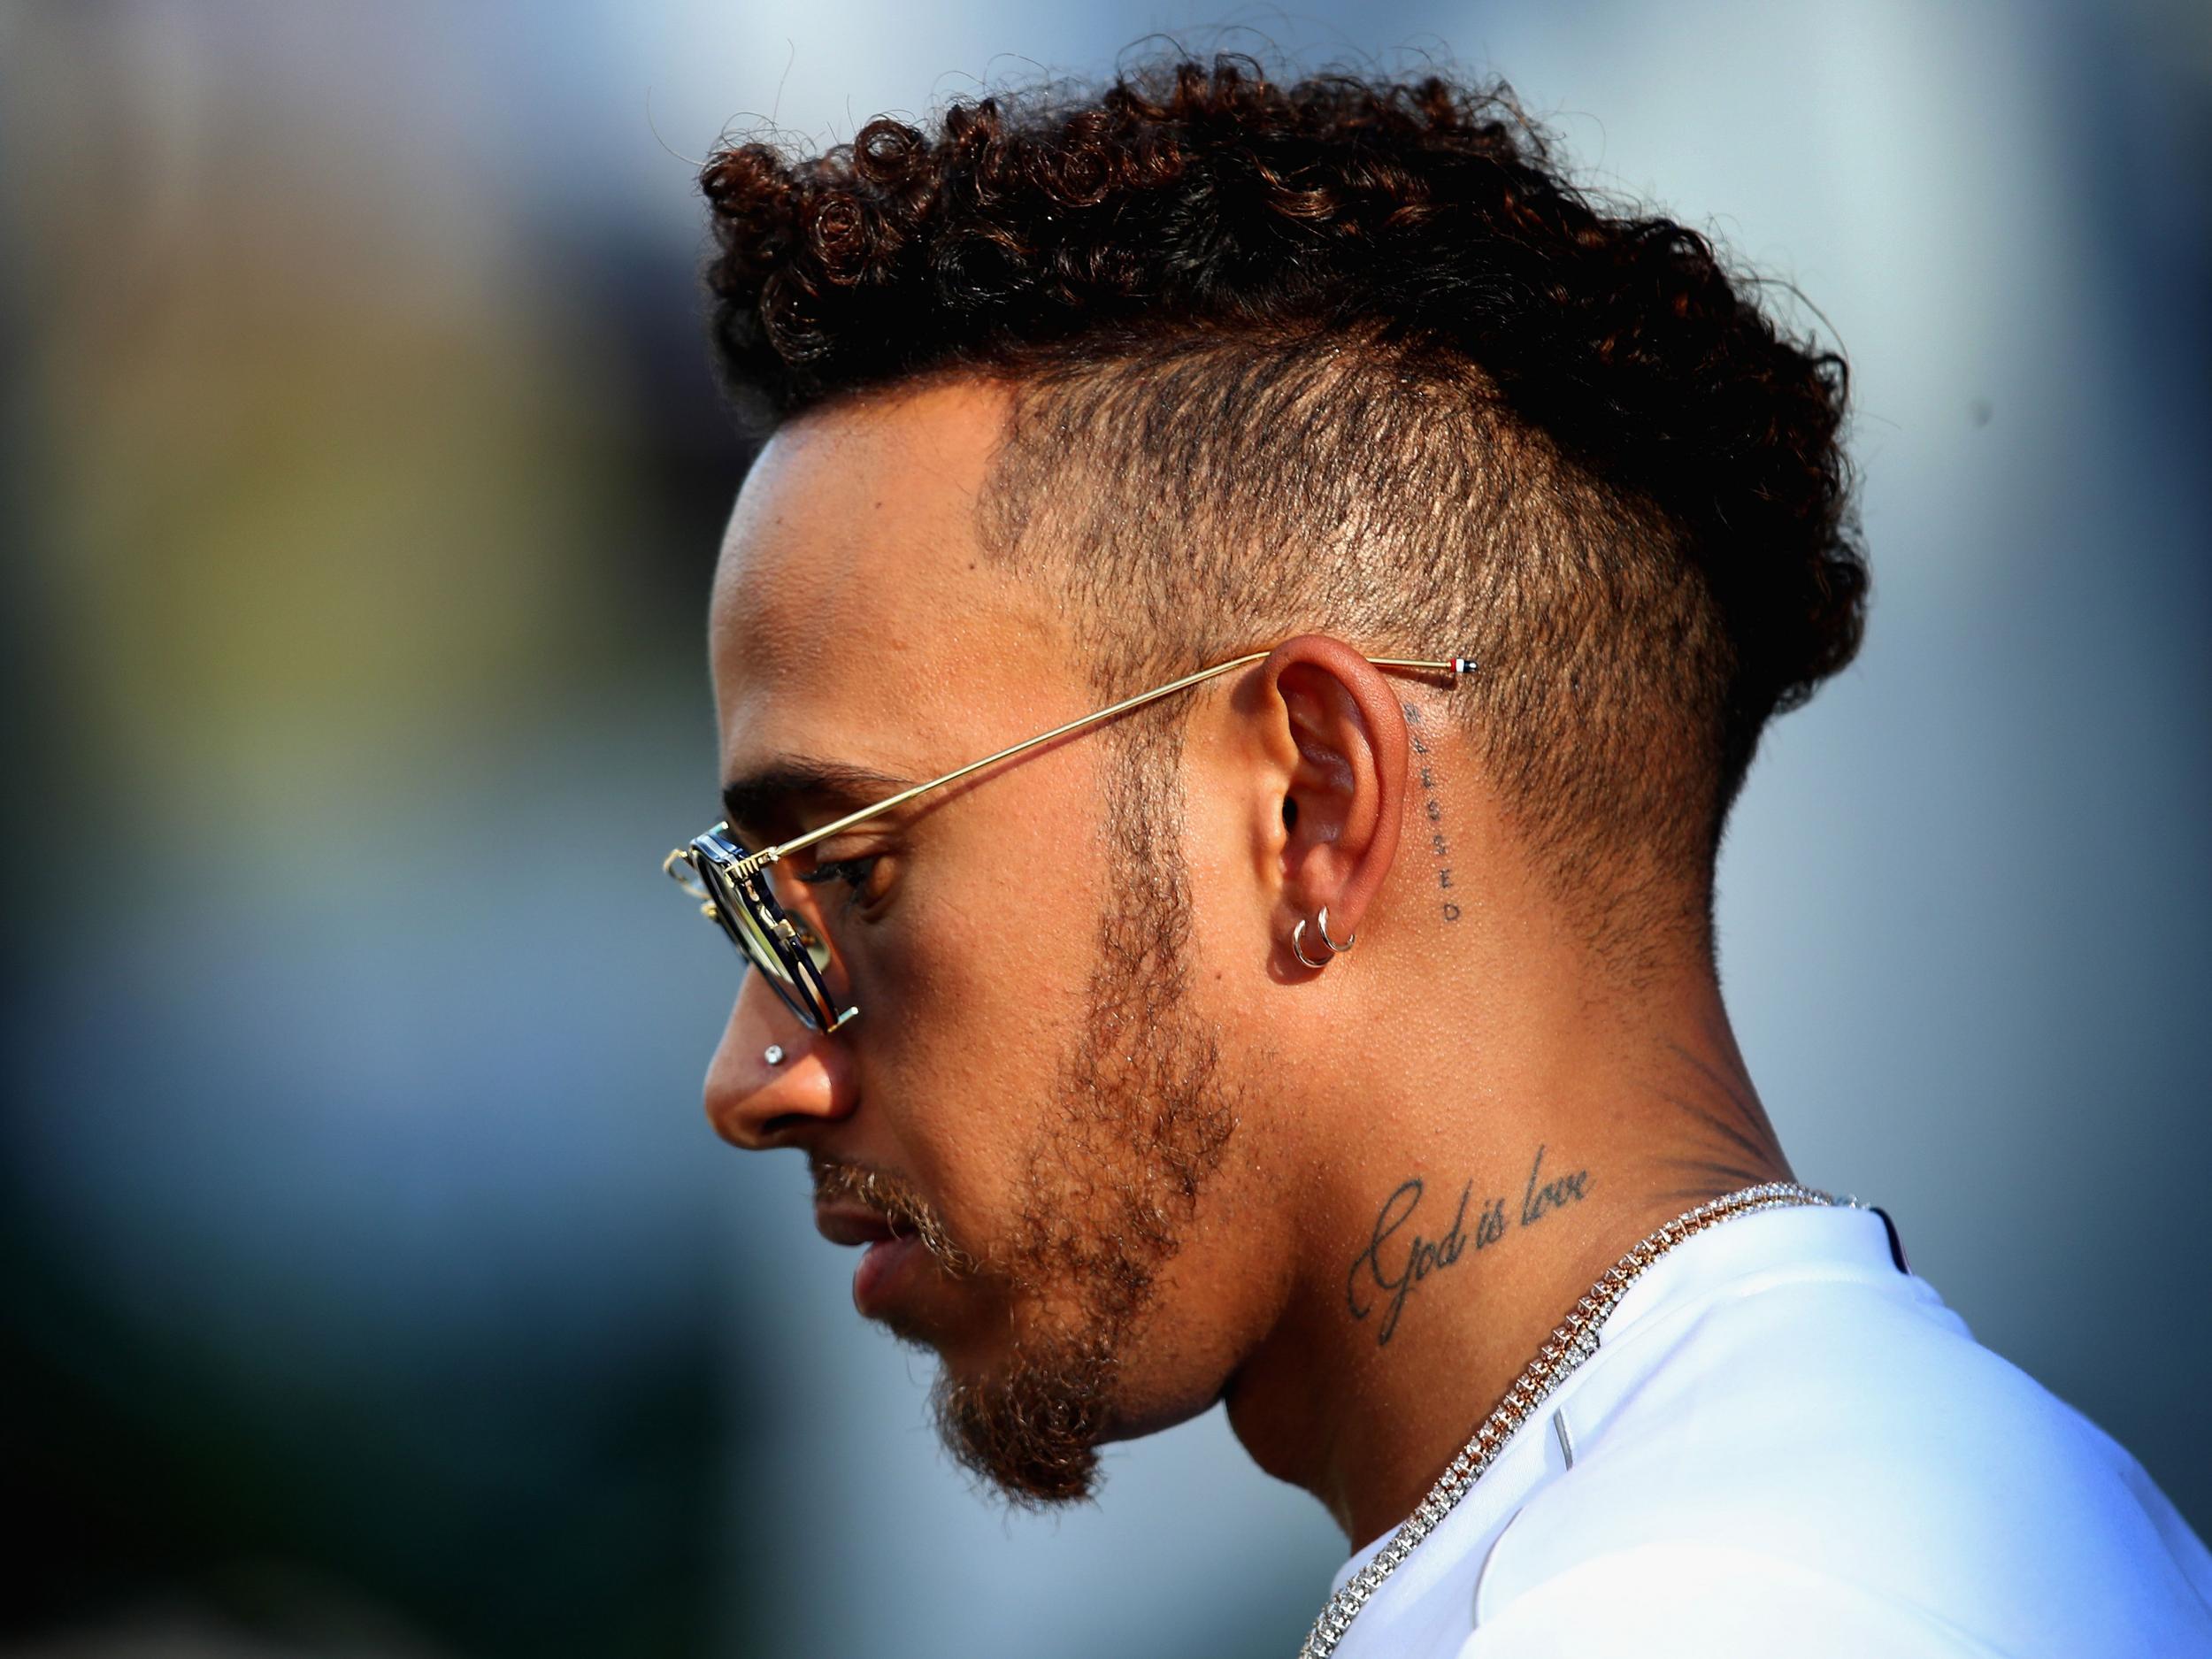 Lewis Hamilton is the only black driver on the grid